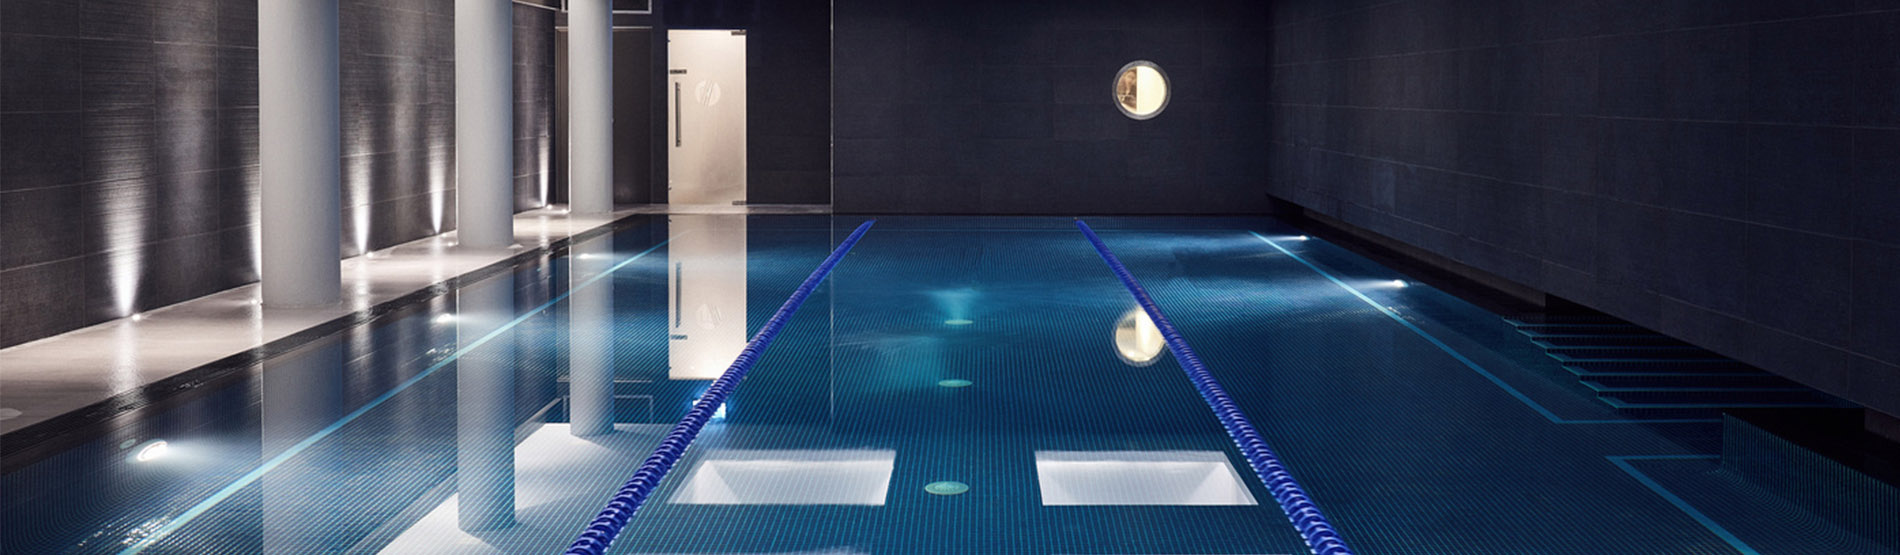 The swimming pool at The Marylebone